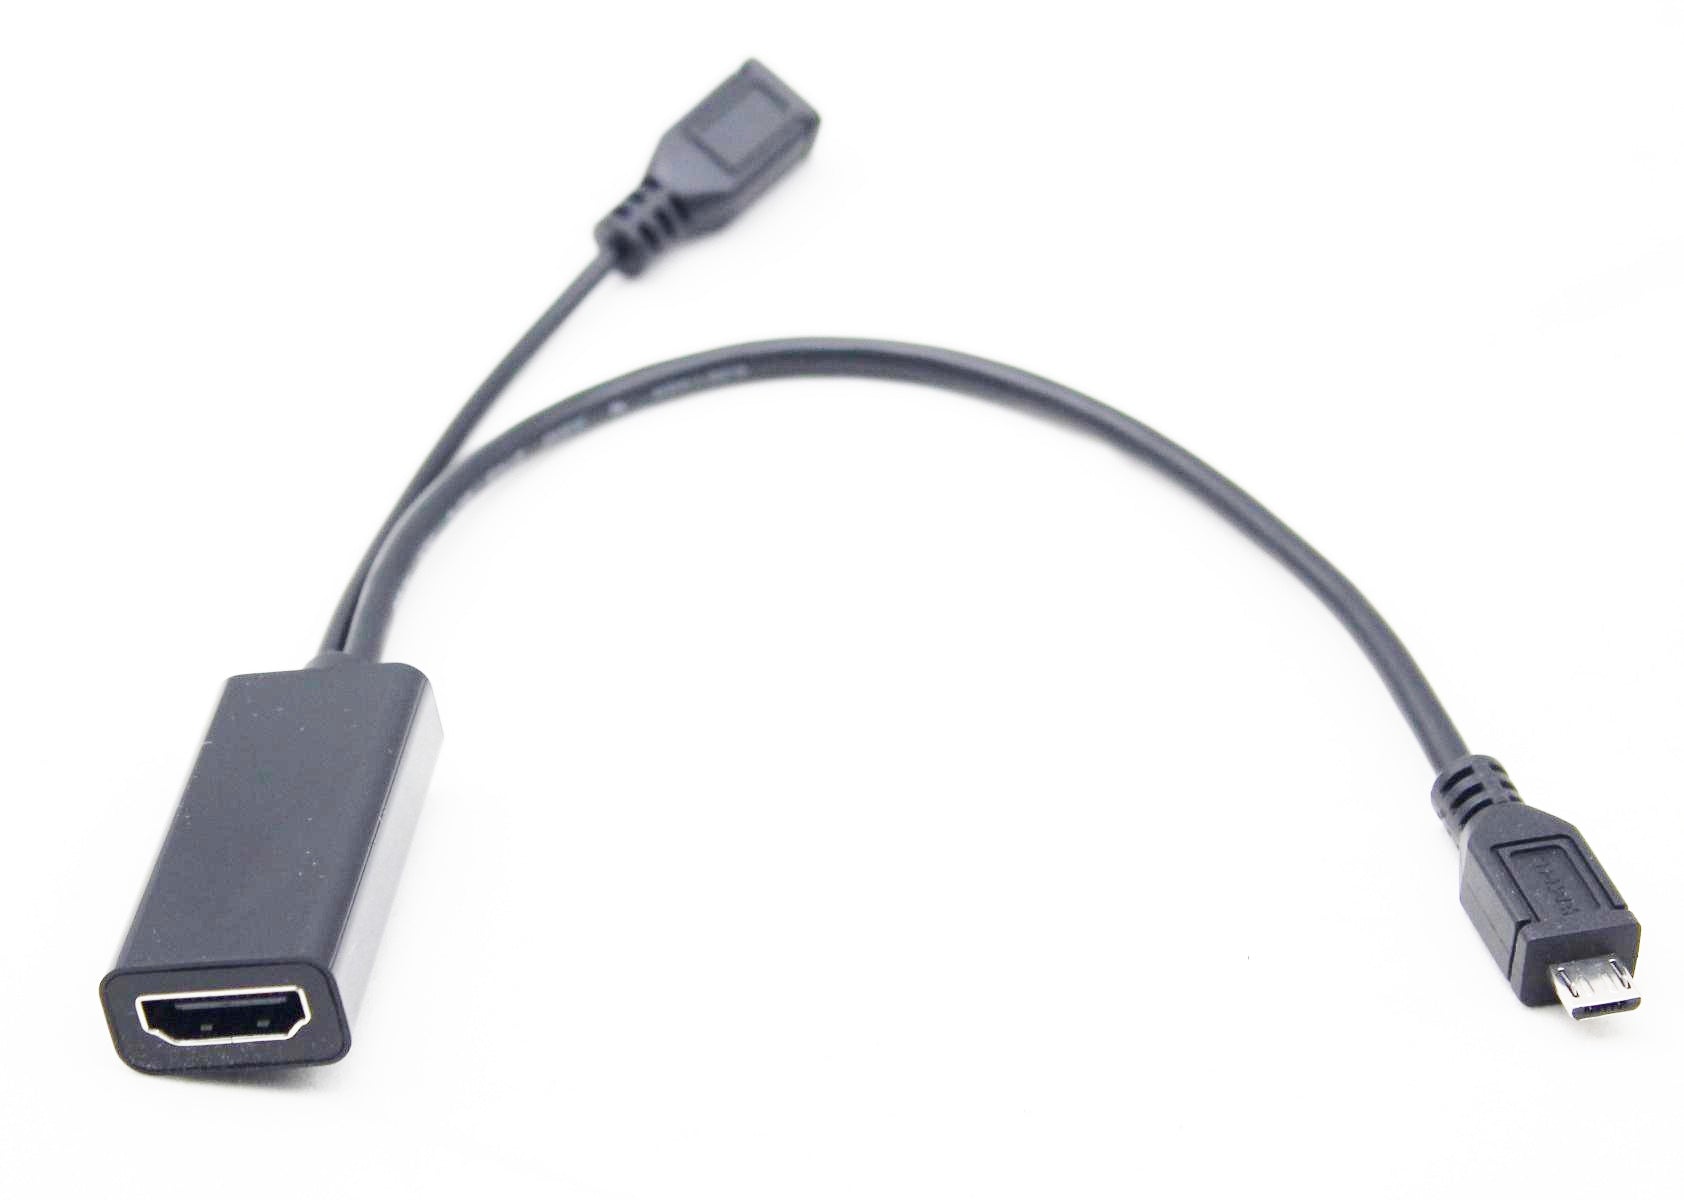 IBRA RANGE MHL to HDMI TV-Out Adapter with Micro USB charging for Samsung i9100 Galaxy S II 2 HTC EVO 3D Flyer